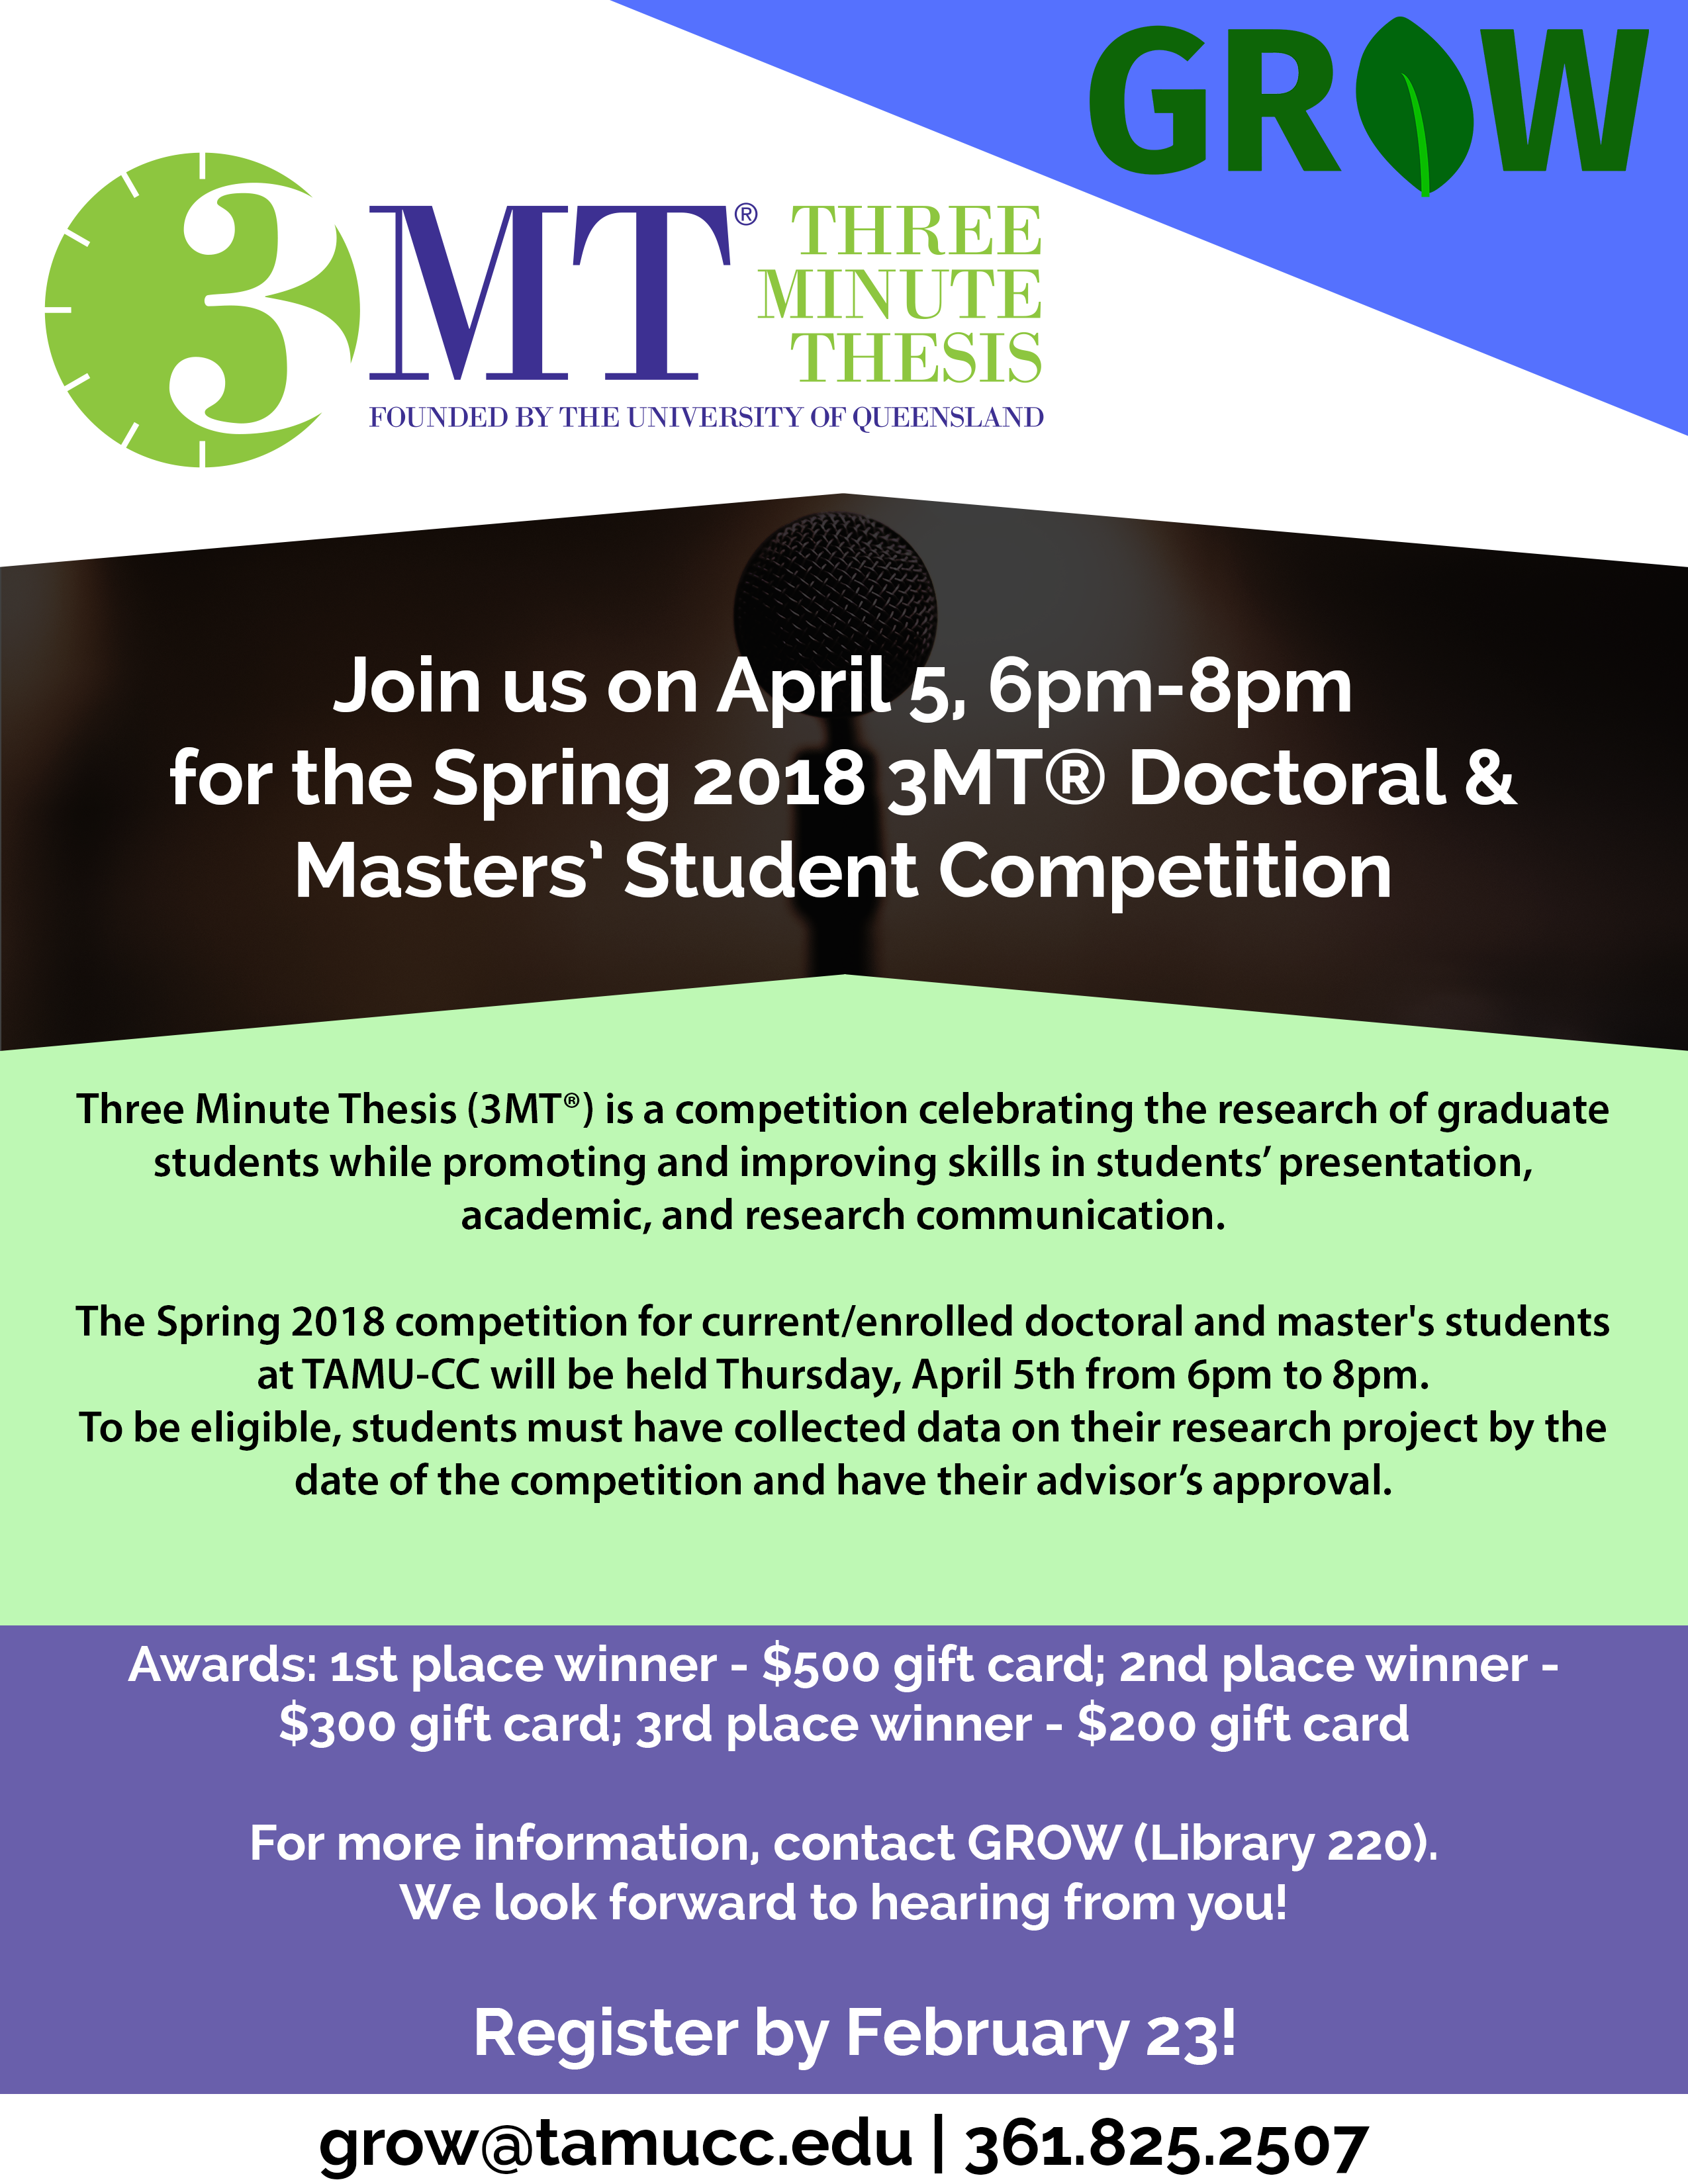 Three minute thesis